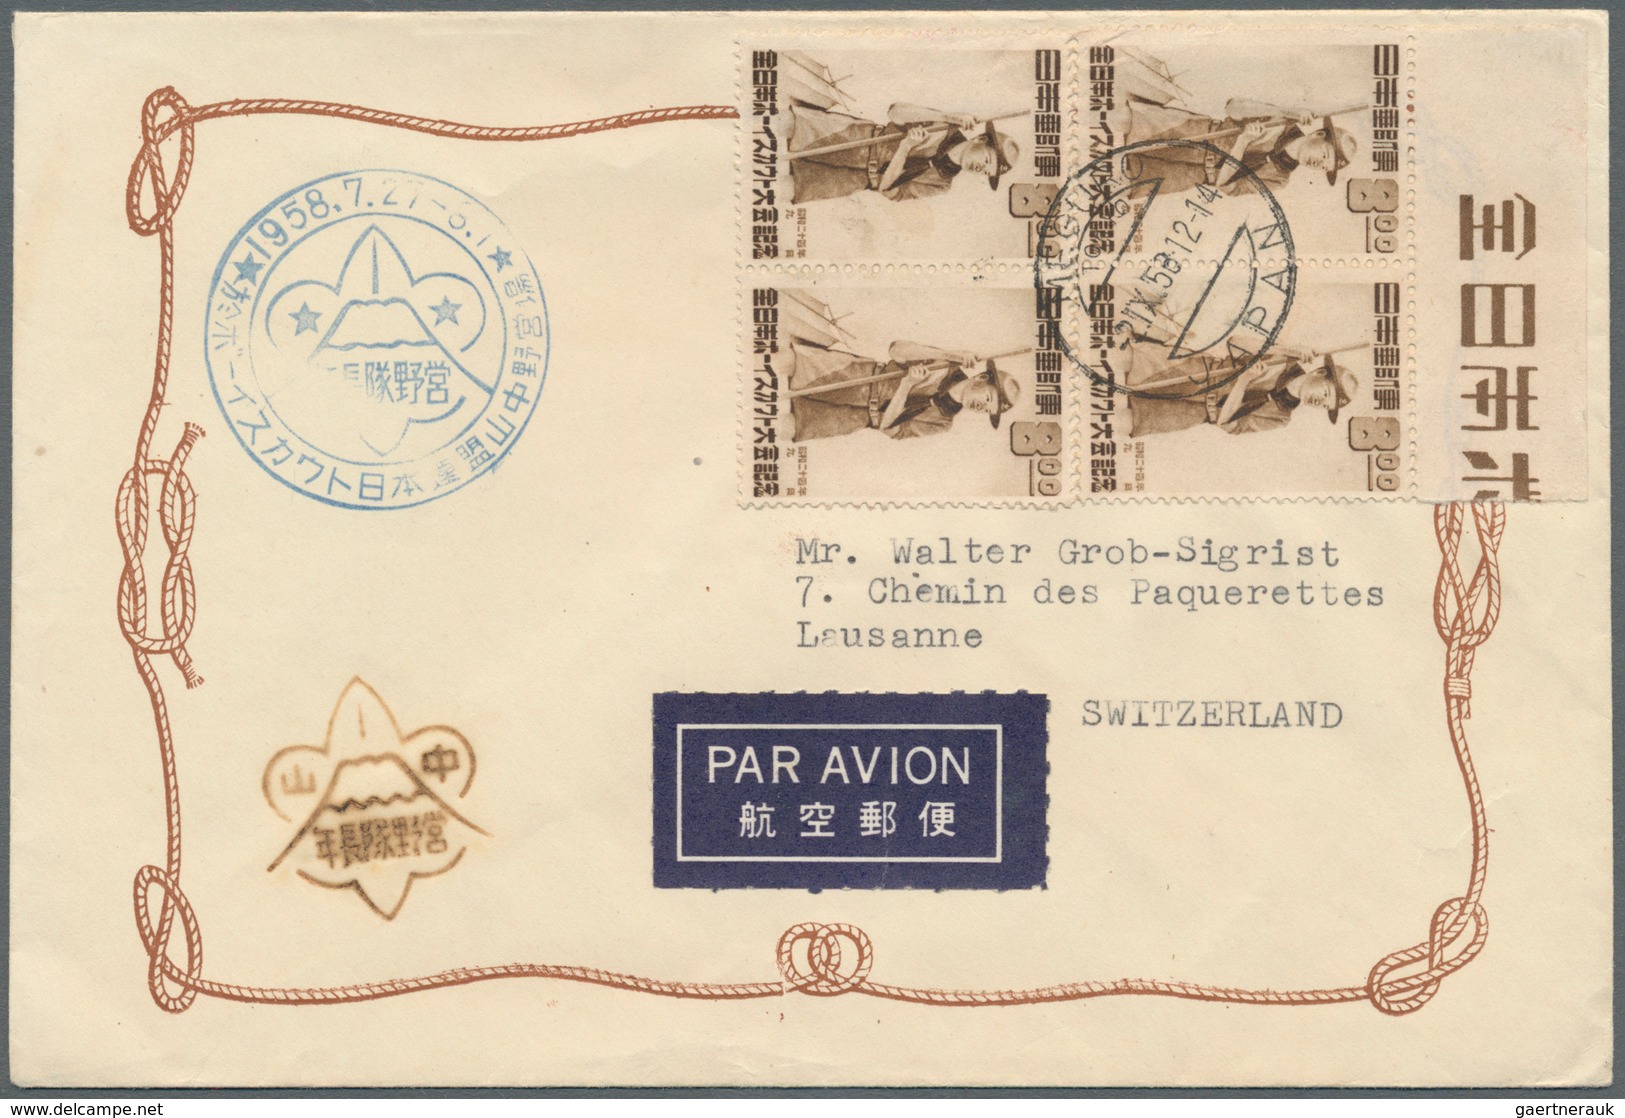 Thematik: Pfadfinder / boy scouts: 1949/59, Japan, covers/FDC (9) mostly w. 1949 boy scout stamp inc